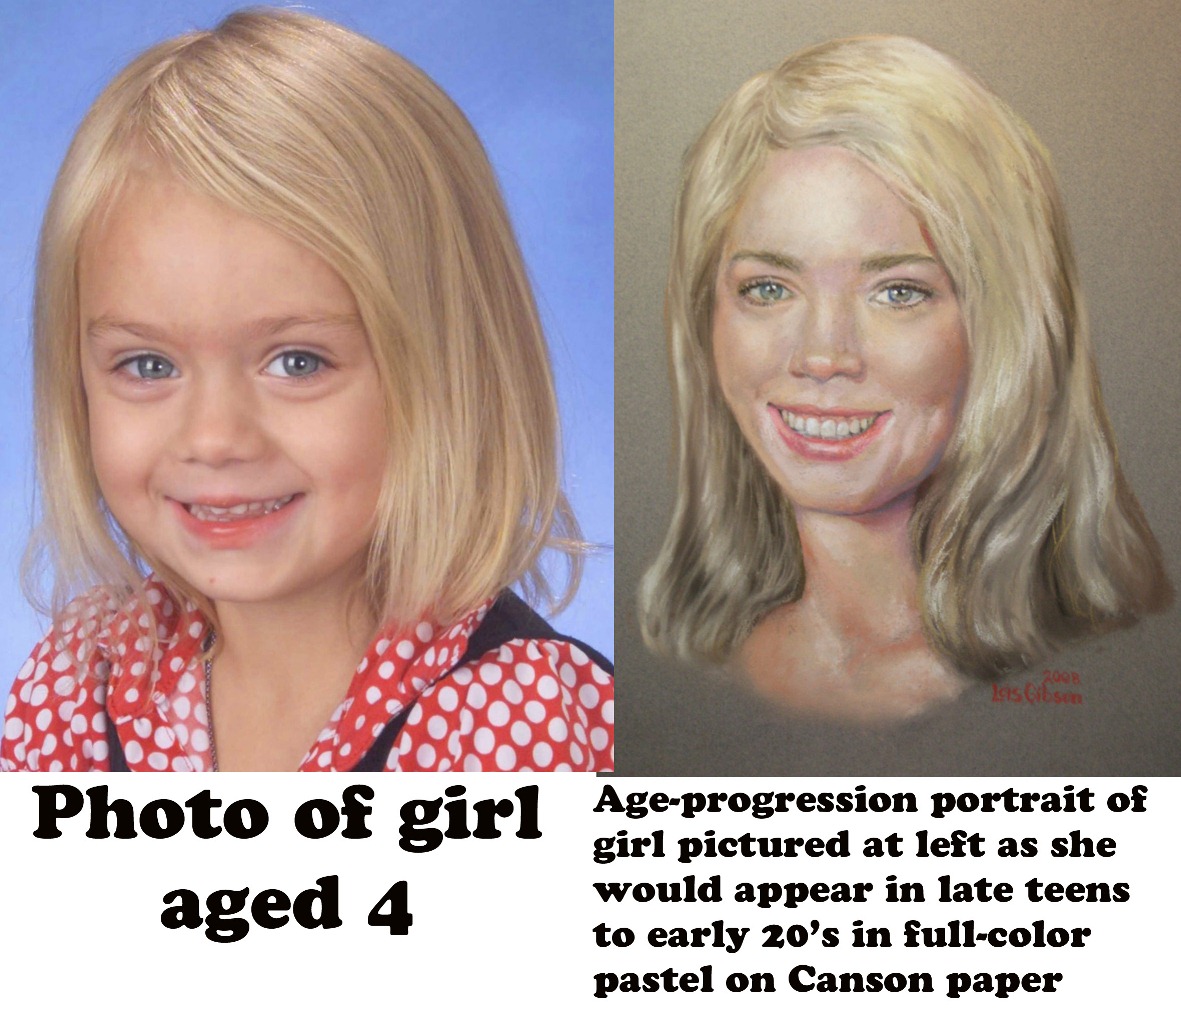 Lois Gibson Forensic Sketches blond - 2008 as Gibson Photo of girl Ageprogression portrait of aged 4 girl pictured at left as she would appear in late teens to early 20's in fullcolor pastel on Canson paper